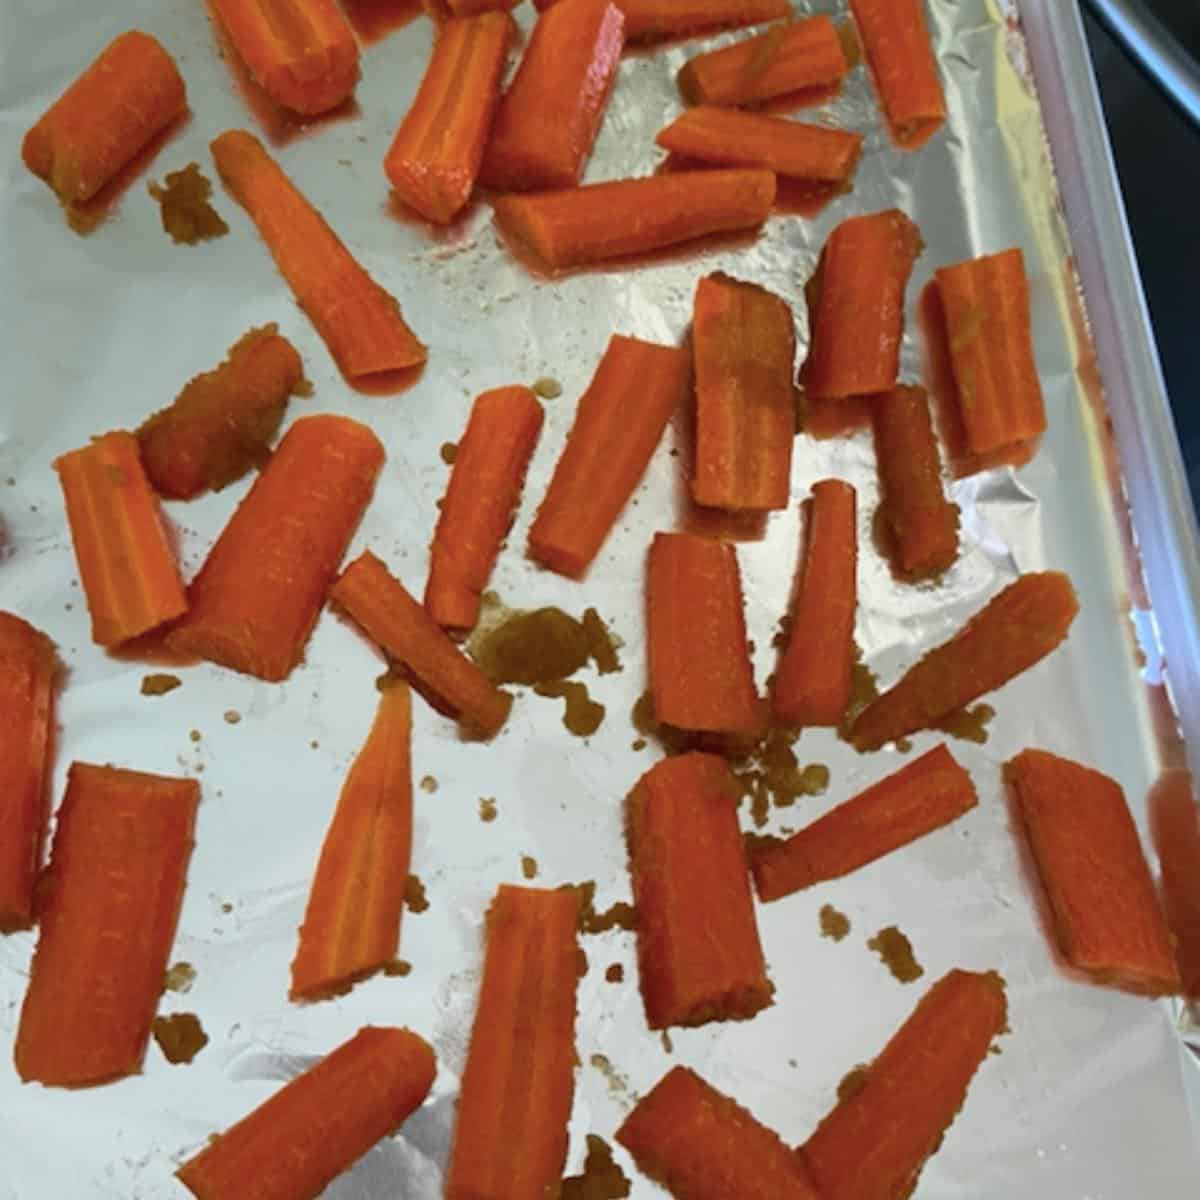 carrots tossed in glaze ready to bake